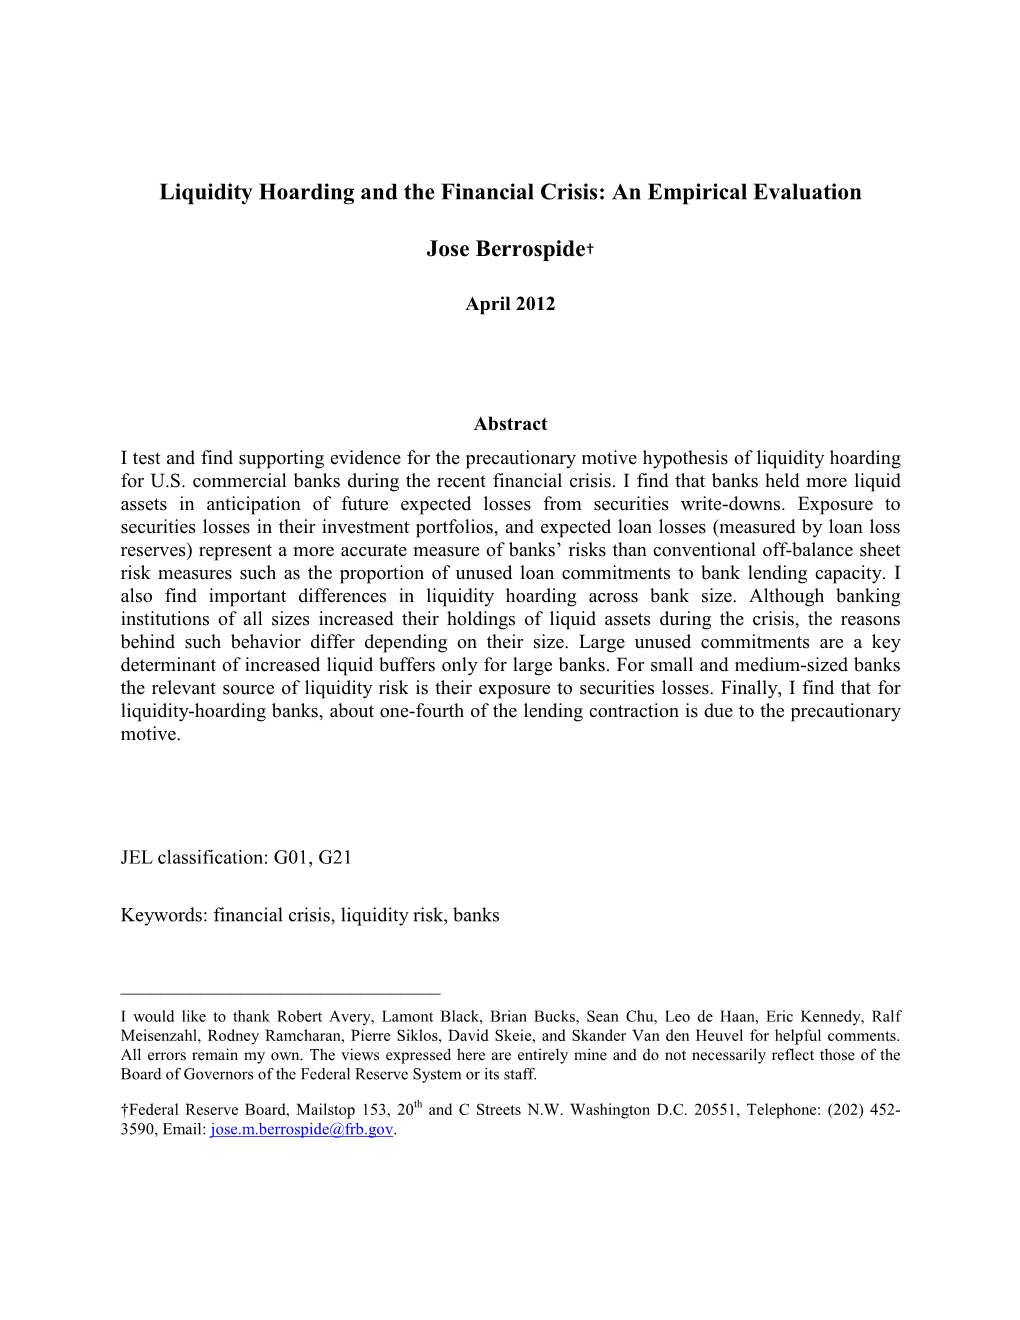 Liquidity Hoarding and the Financial Crisis: an Empirical Evaluation